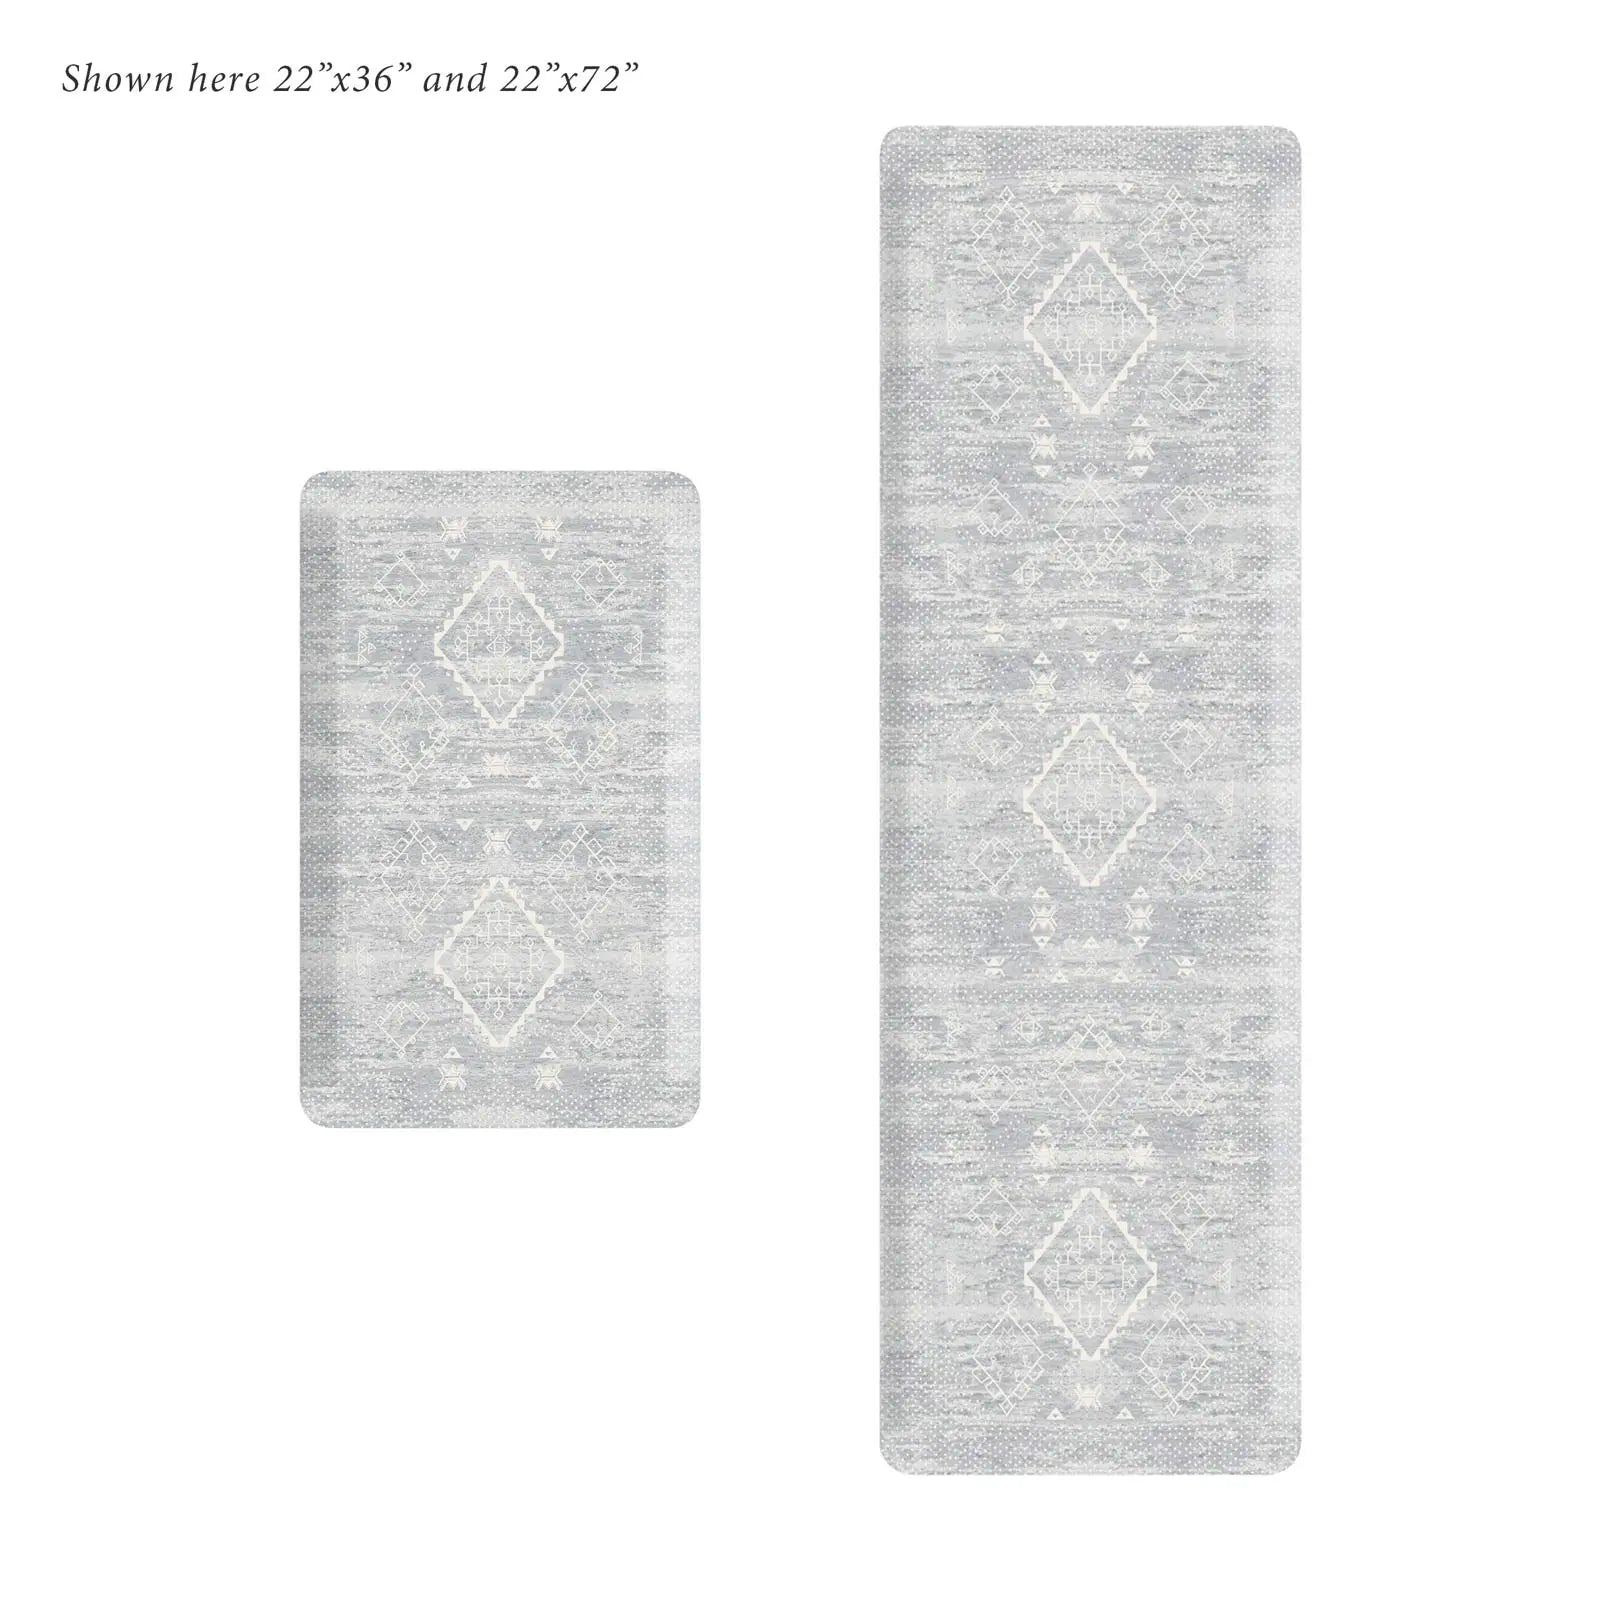 Ula gray and white Minimal Boho Pattern Standing Mat shown in sizes 22x36 and 22x72